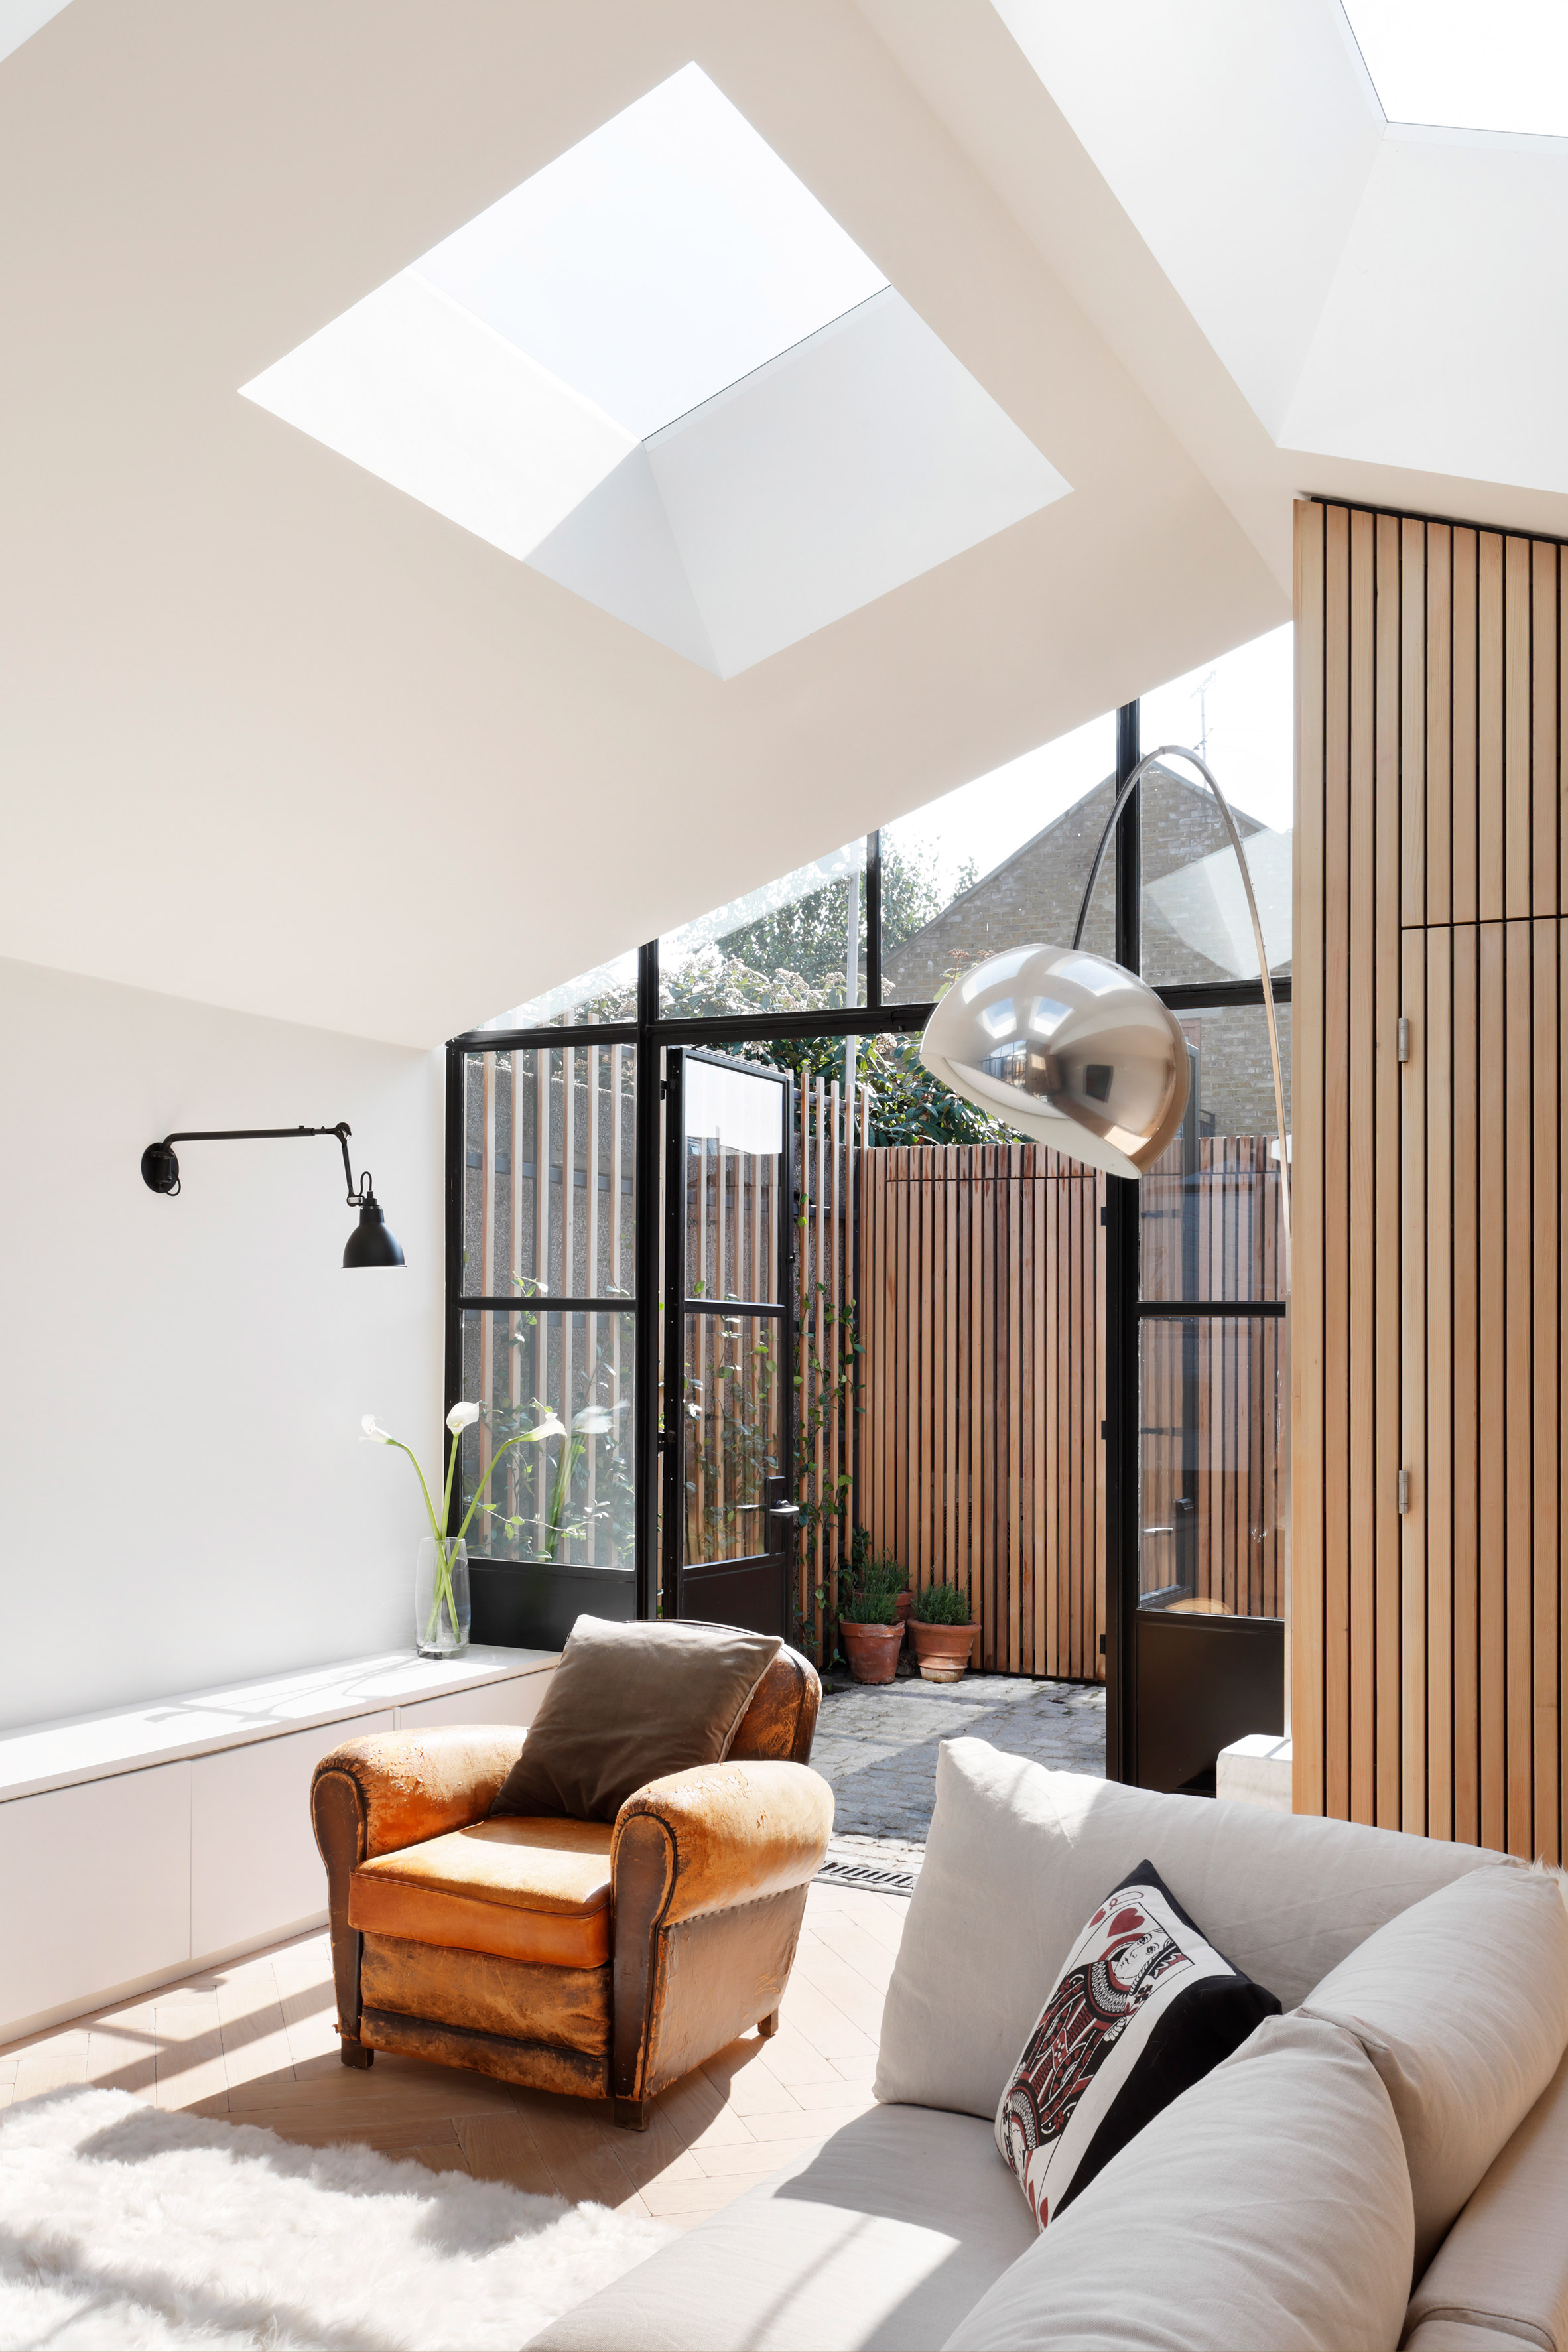 Modern Floor Lamps Bring Light into West London House 1